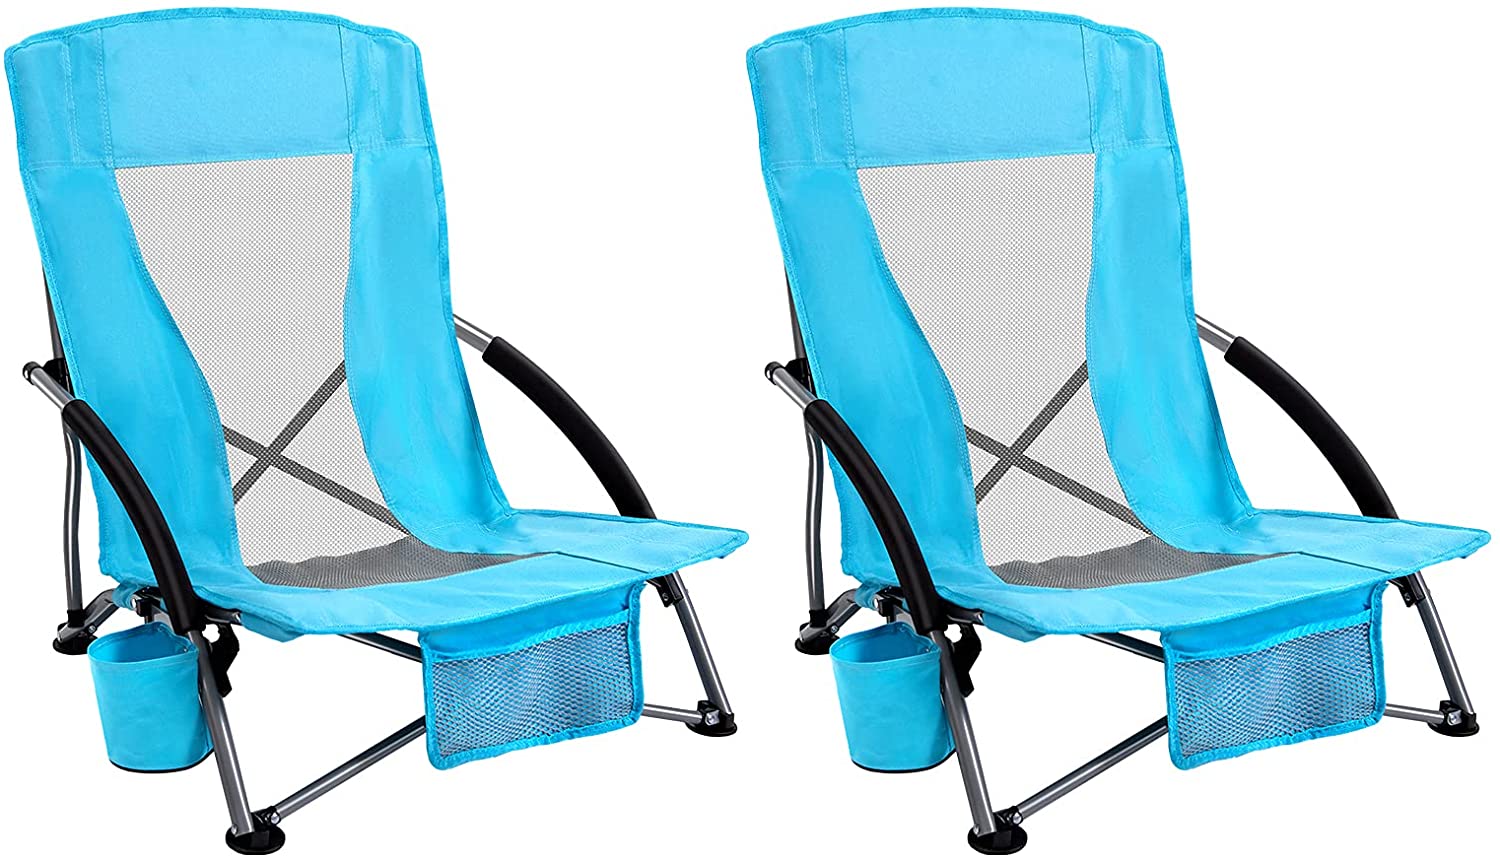 New Movtotop Beach Chair for Small Space